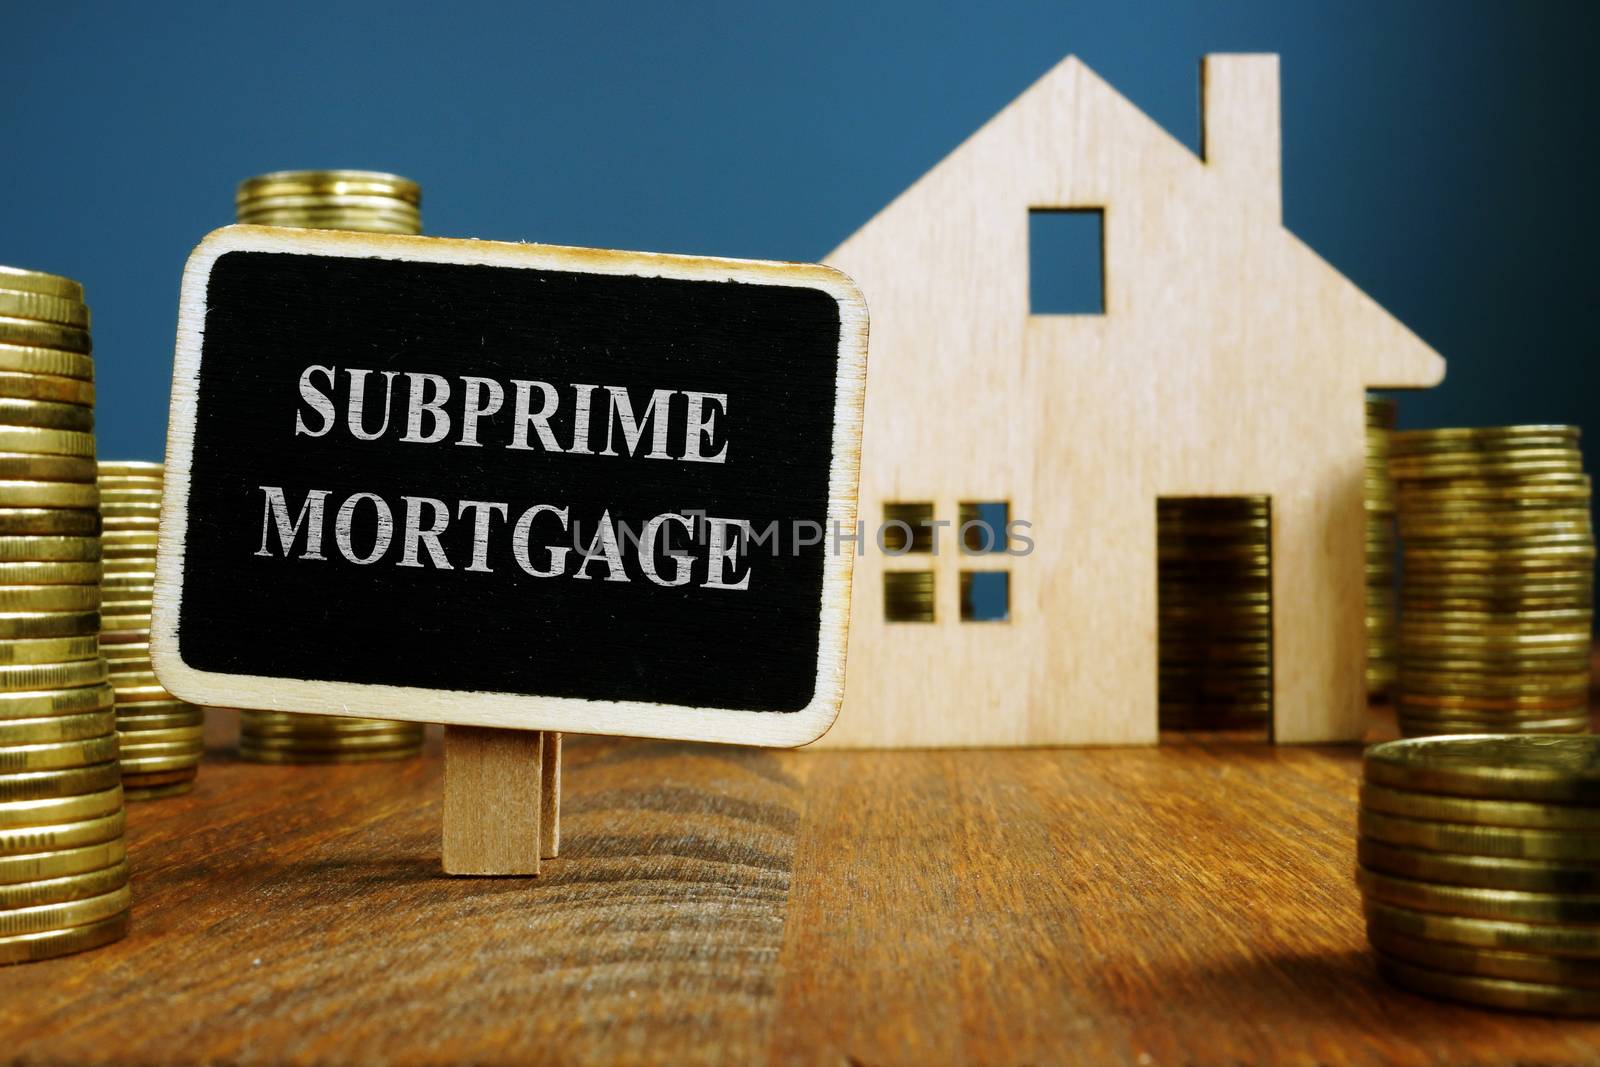 Subprime mortgage plate and model of home. by designer491